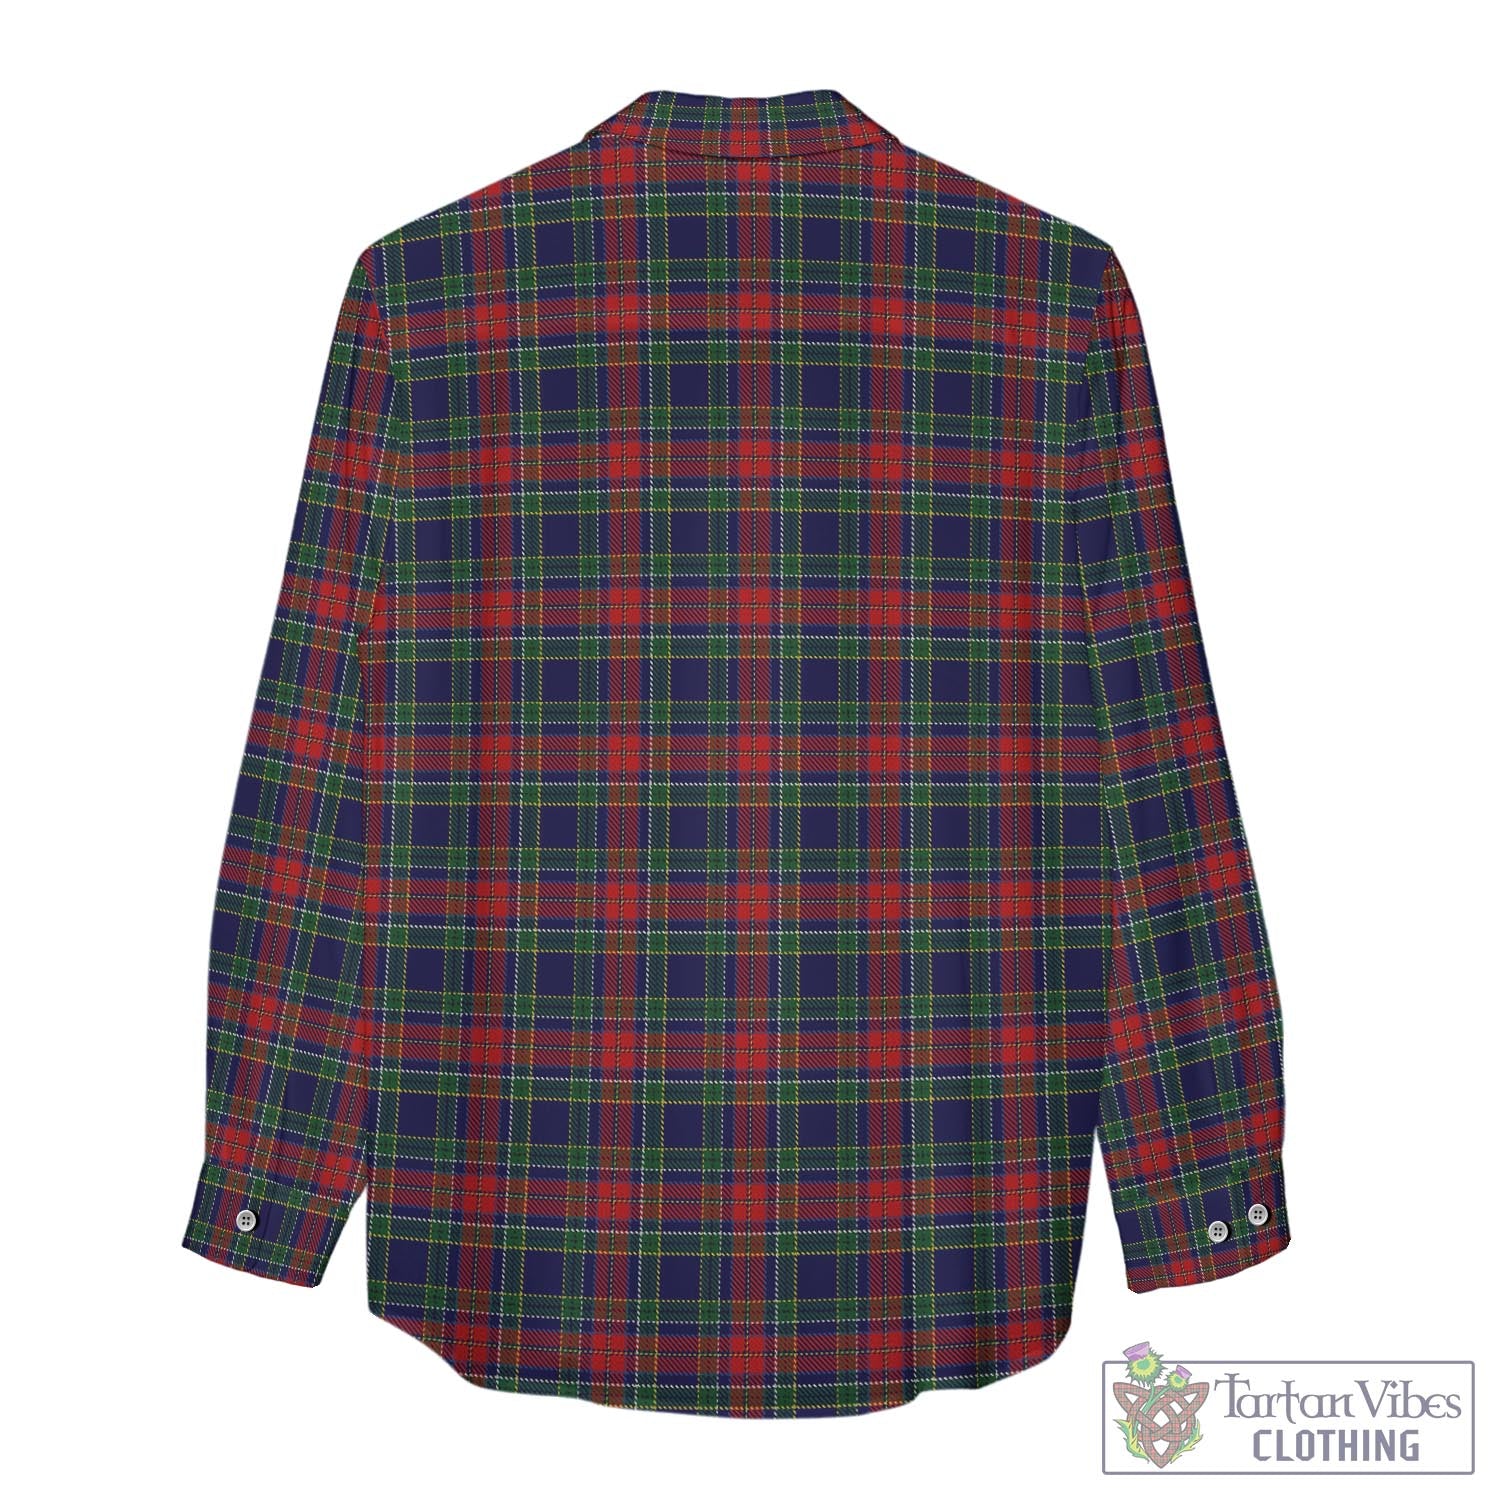 Tartan Vibes Clothing Allison Red Tartan Womens Casual Shirt with Family Crest